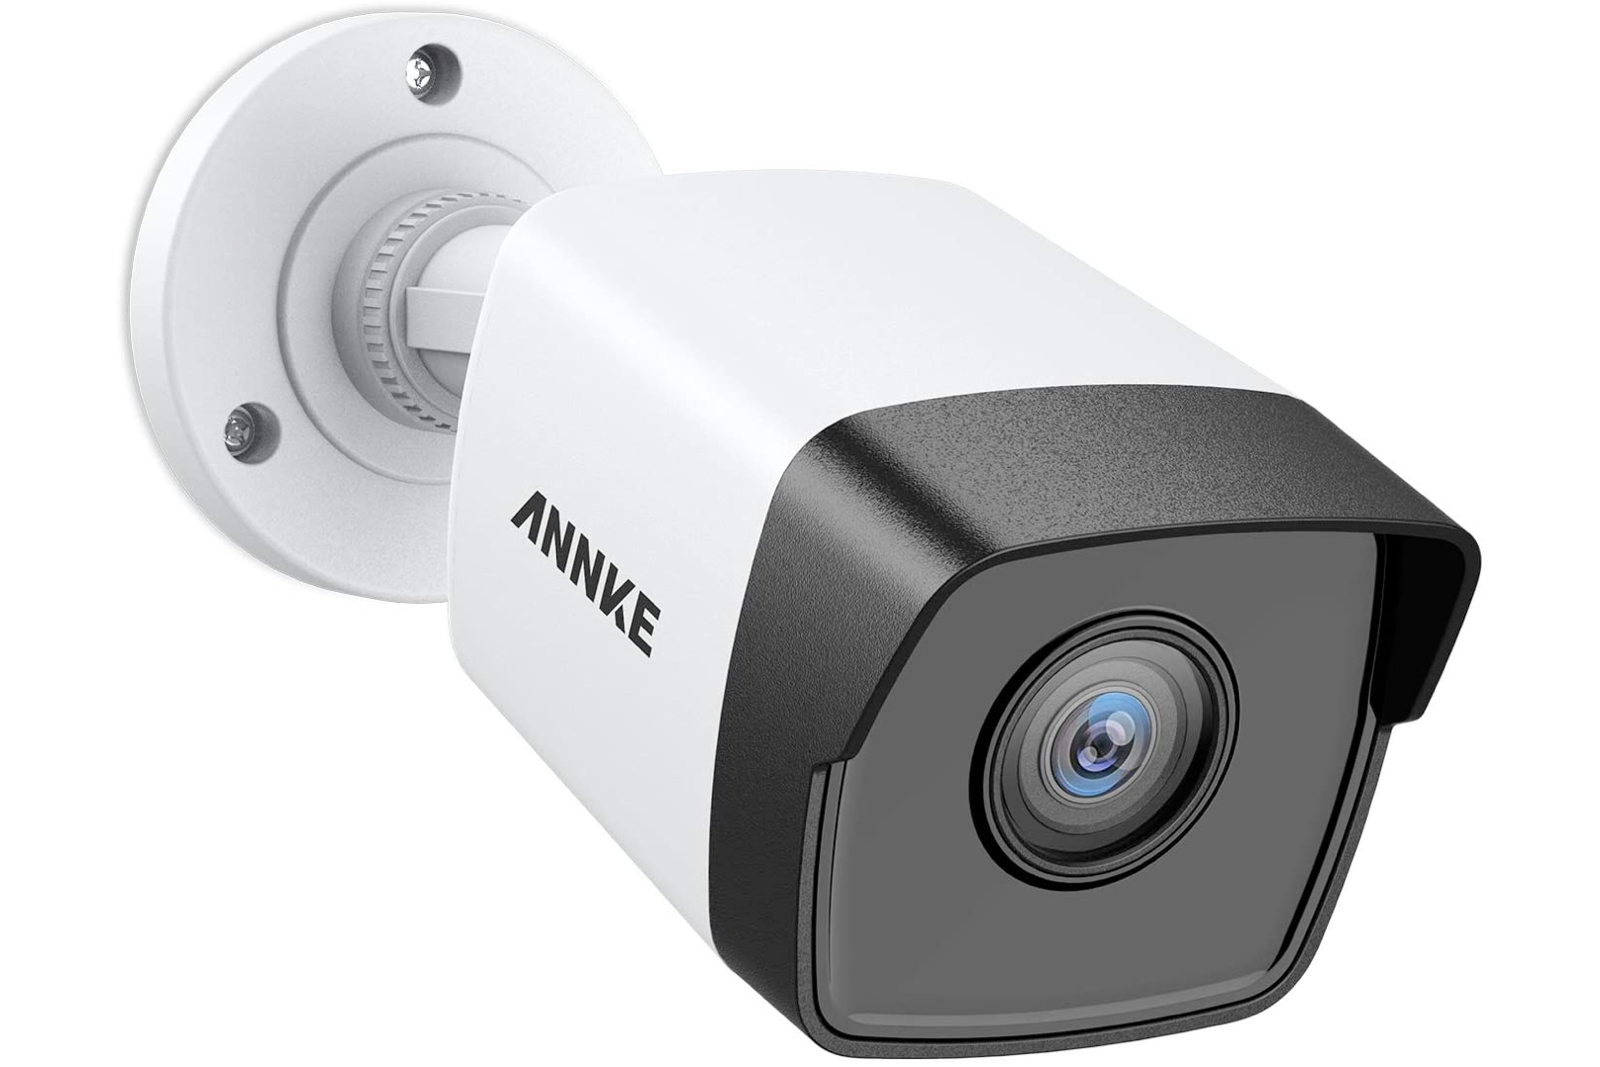 Annke home security deals for Prime Day photo 17